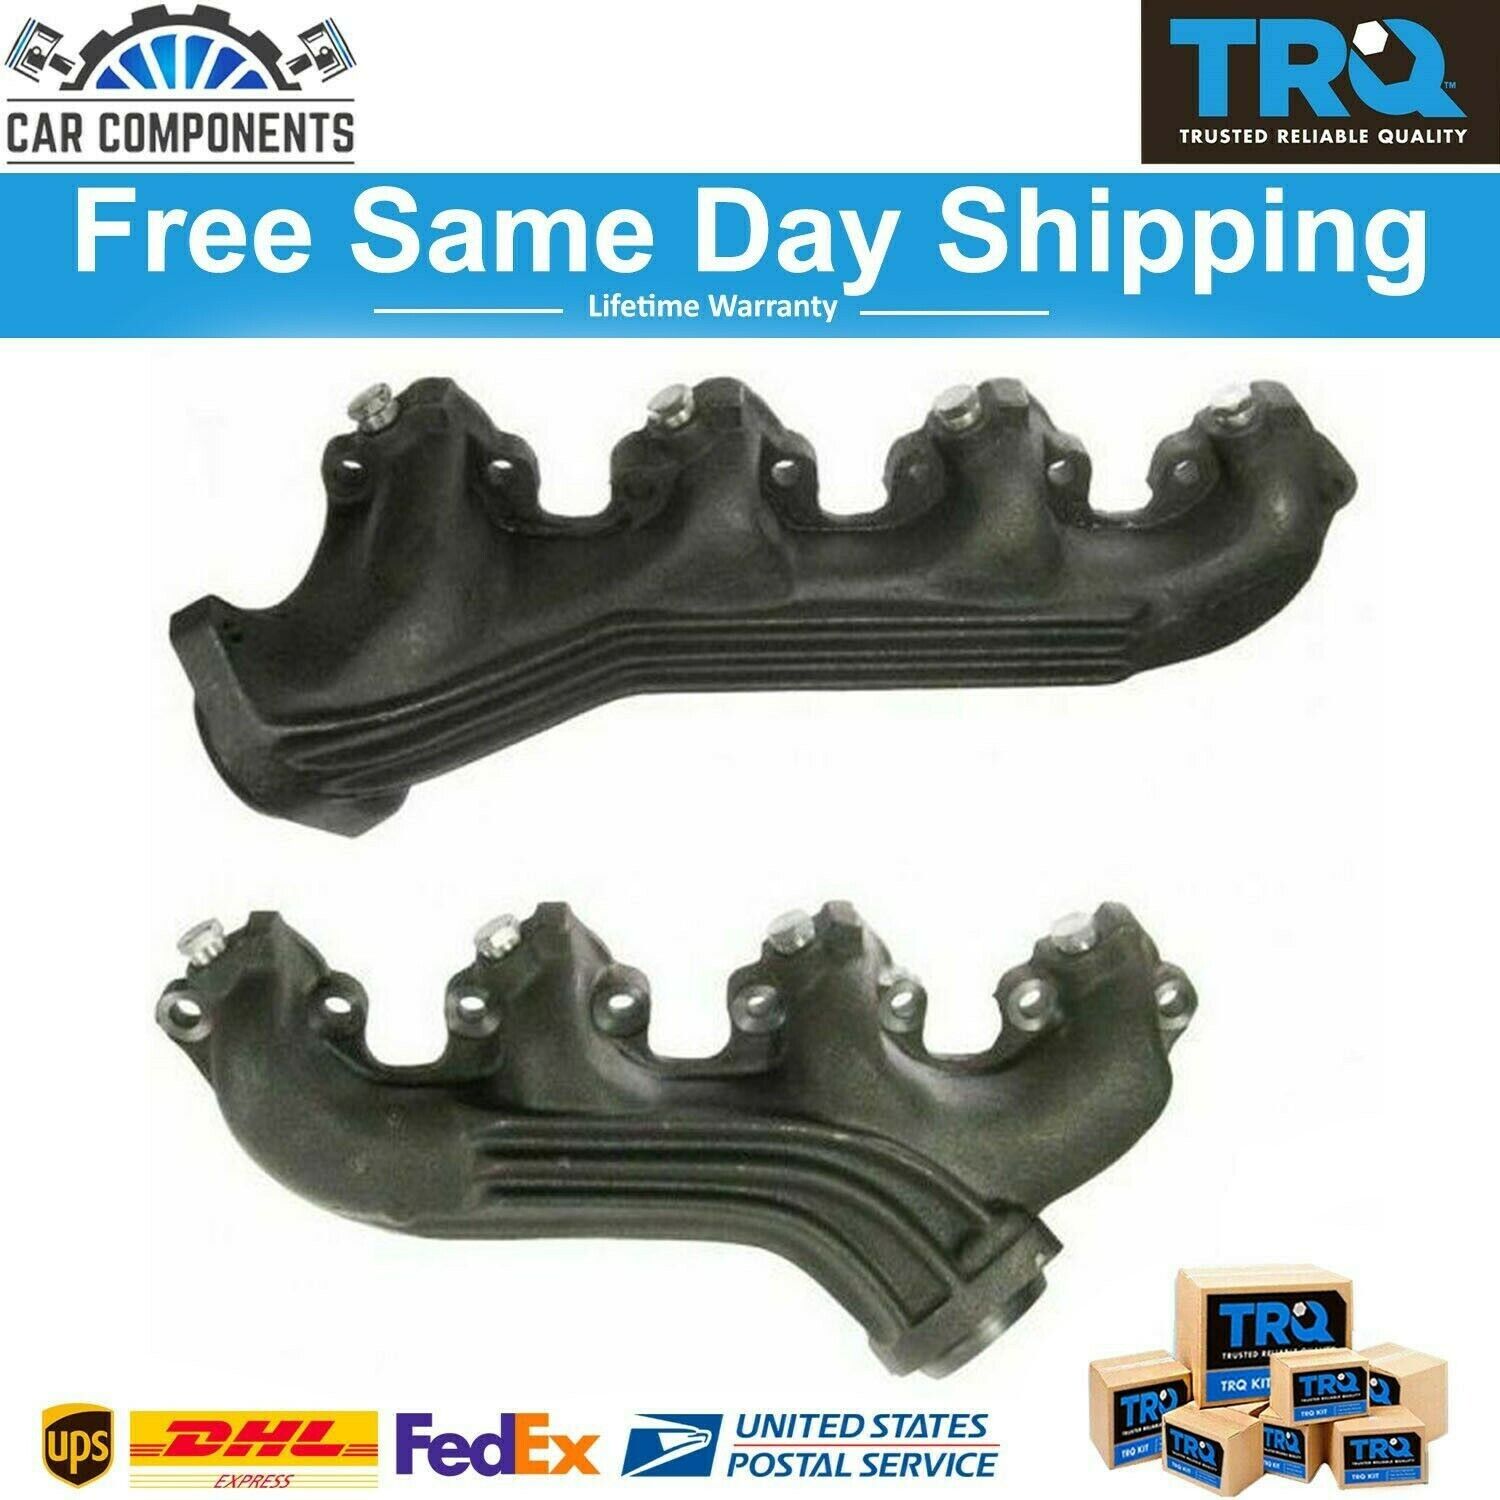 TRQ Exhaust Manifolds Pair For 75-87 Ford F-Series Pickup Truck E-Series 7.5L V8